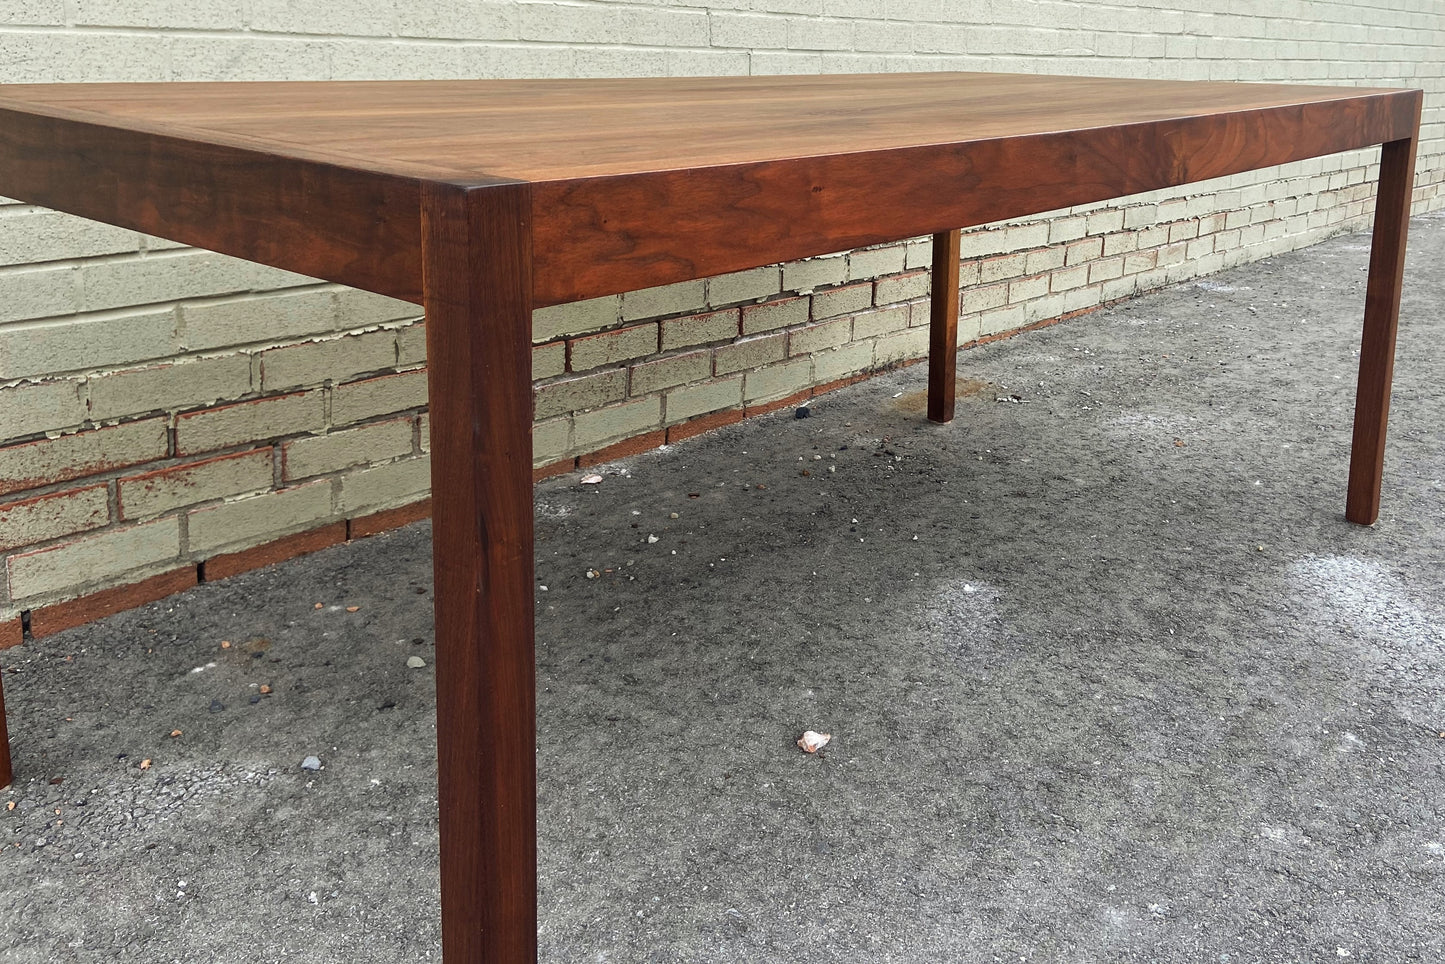 REFINISHED MCM Walnut Dining Table Rectangular 6 ft, PERFECT